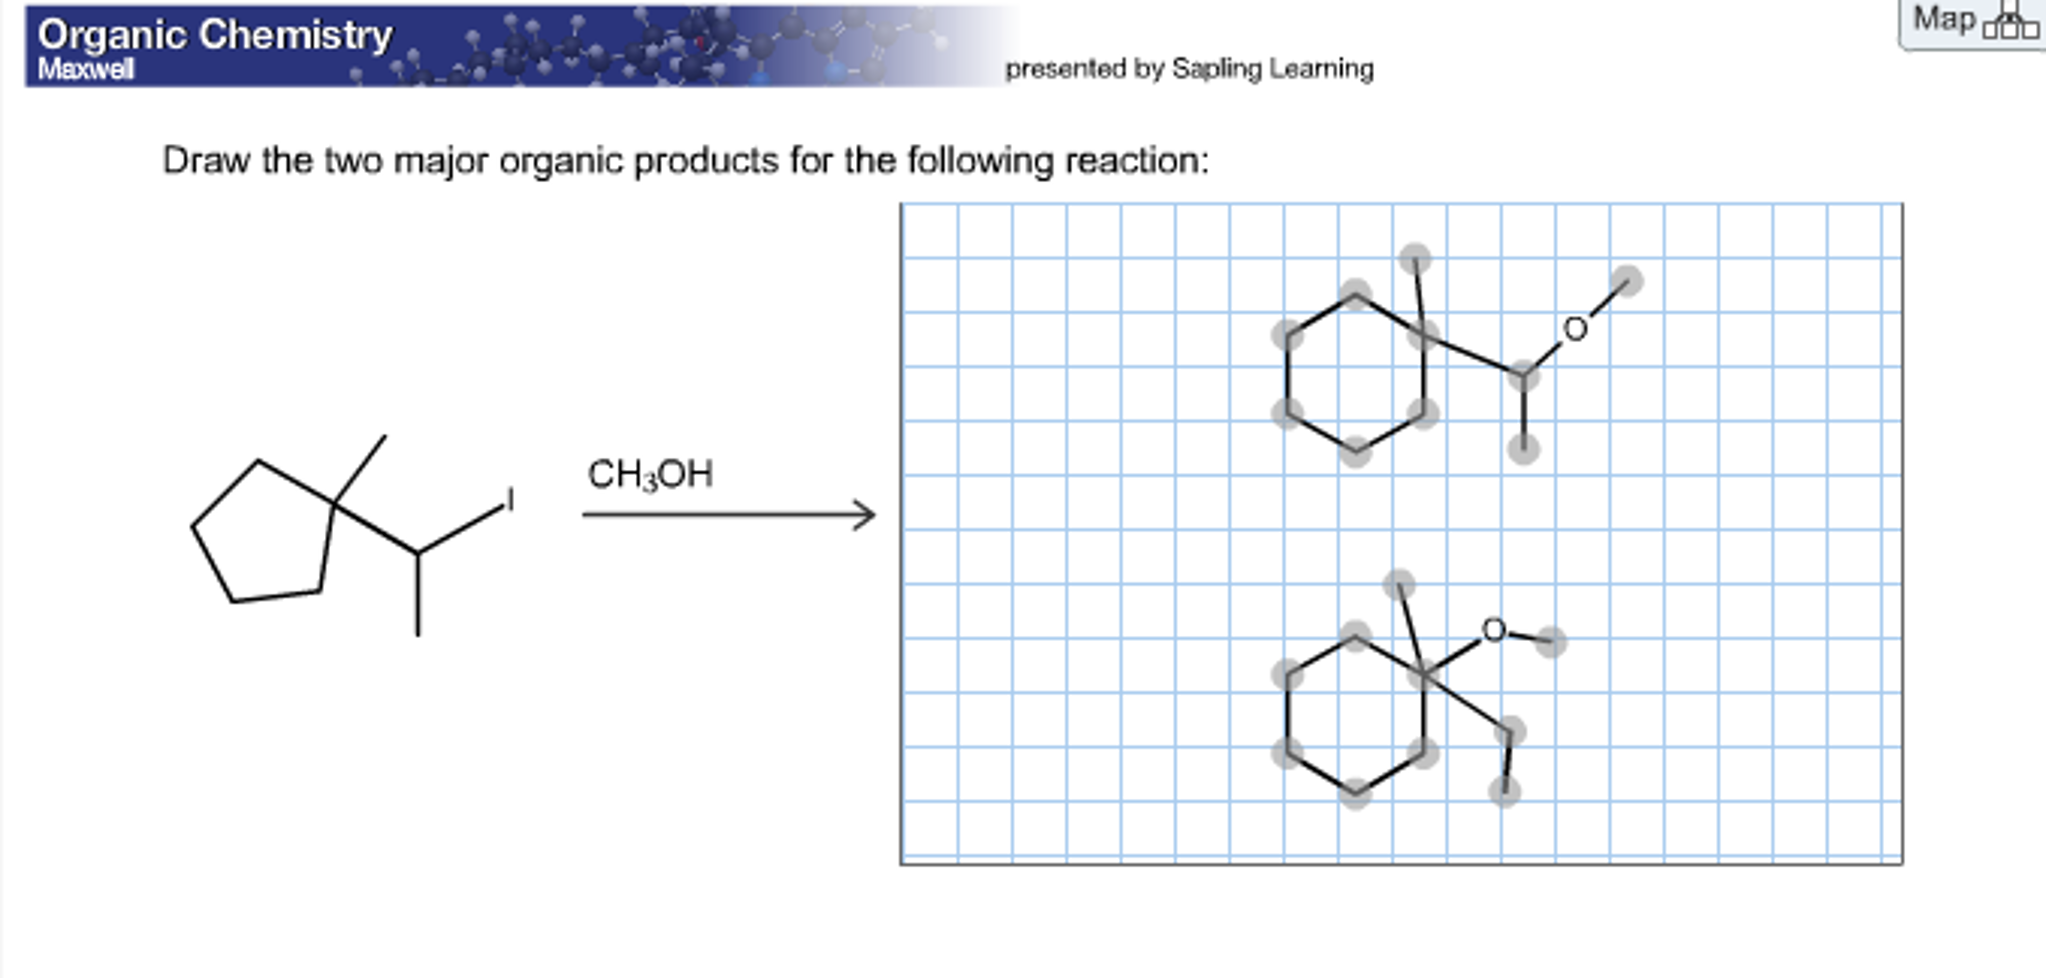 draw the two major organic products for the reaction